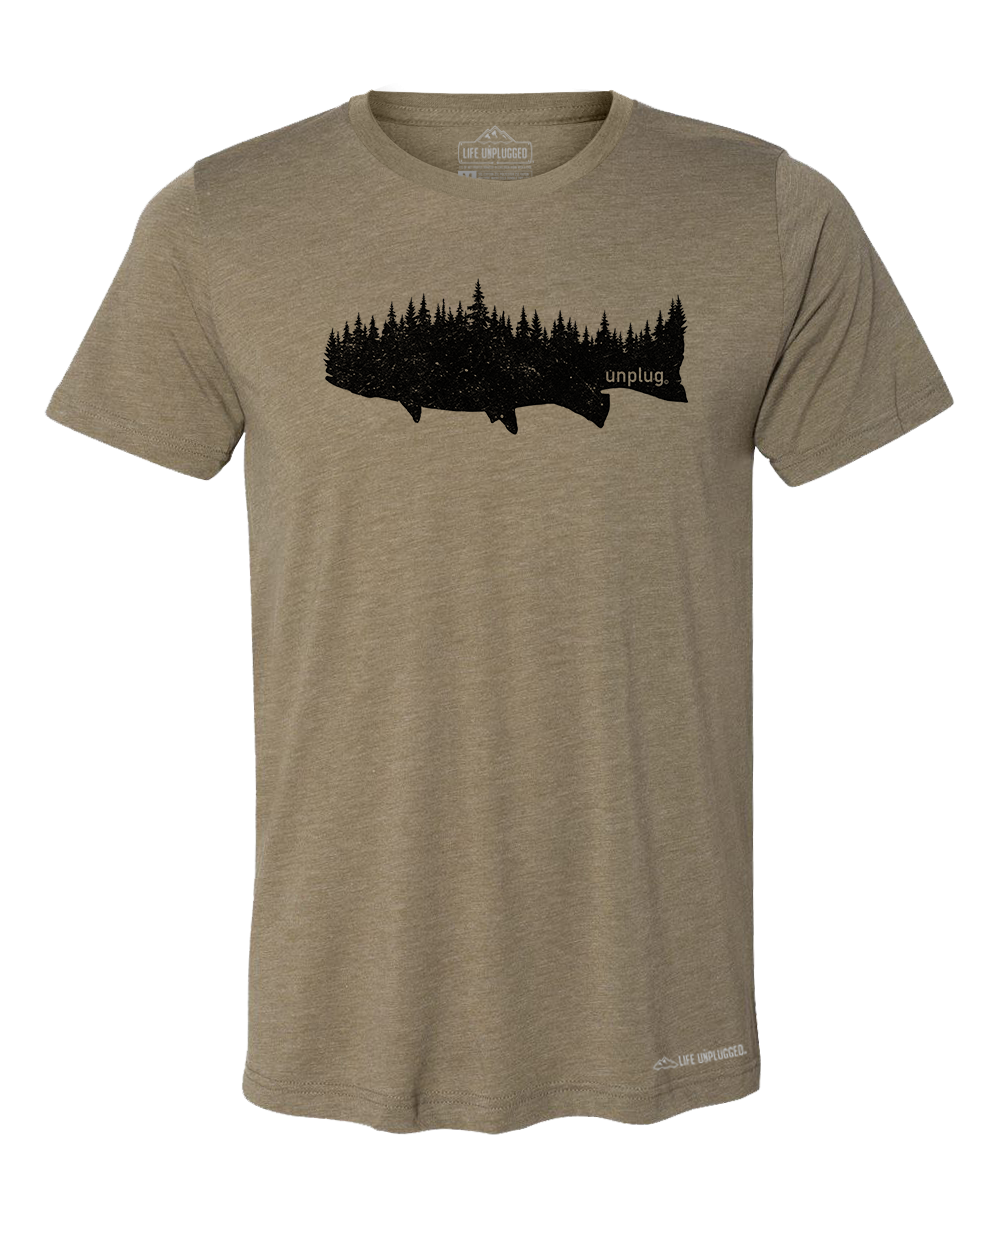 Trout in The Trees Premium Triblend T-Shirt, L / Olive | Life Unplugged